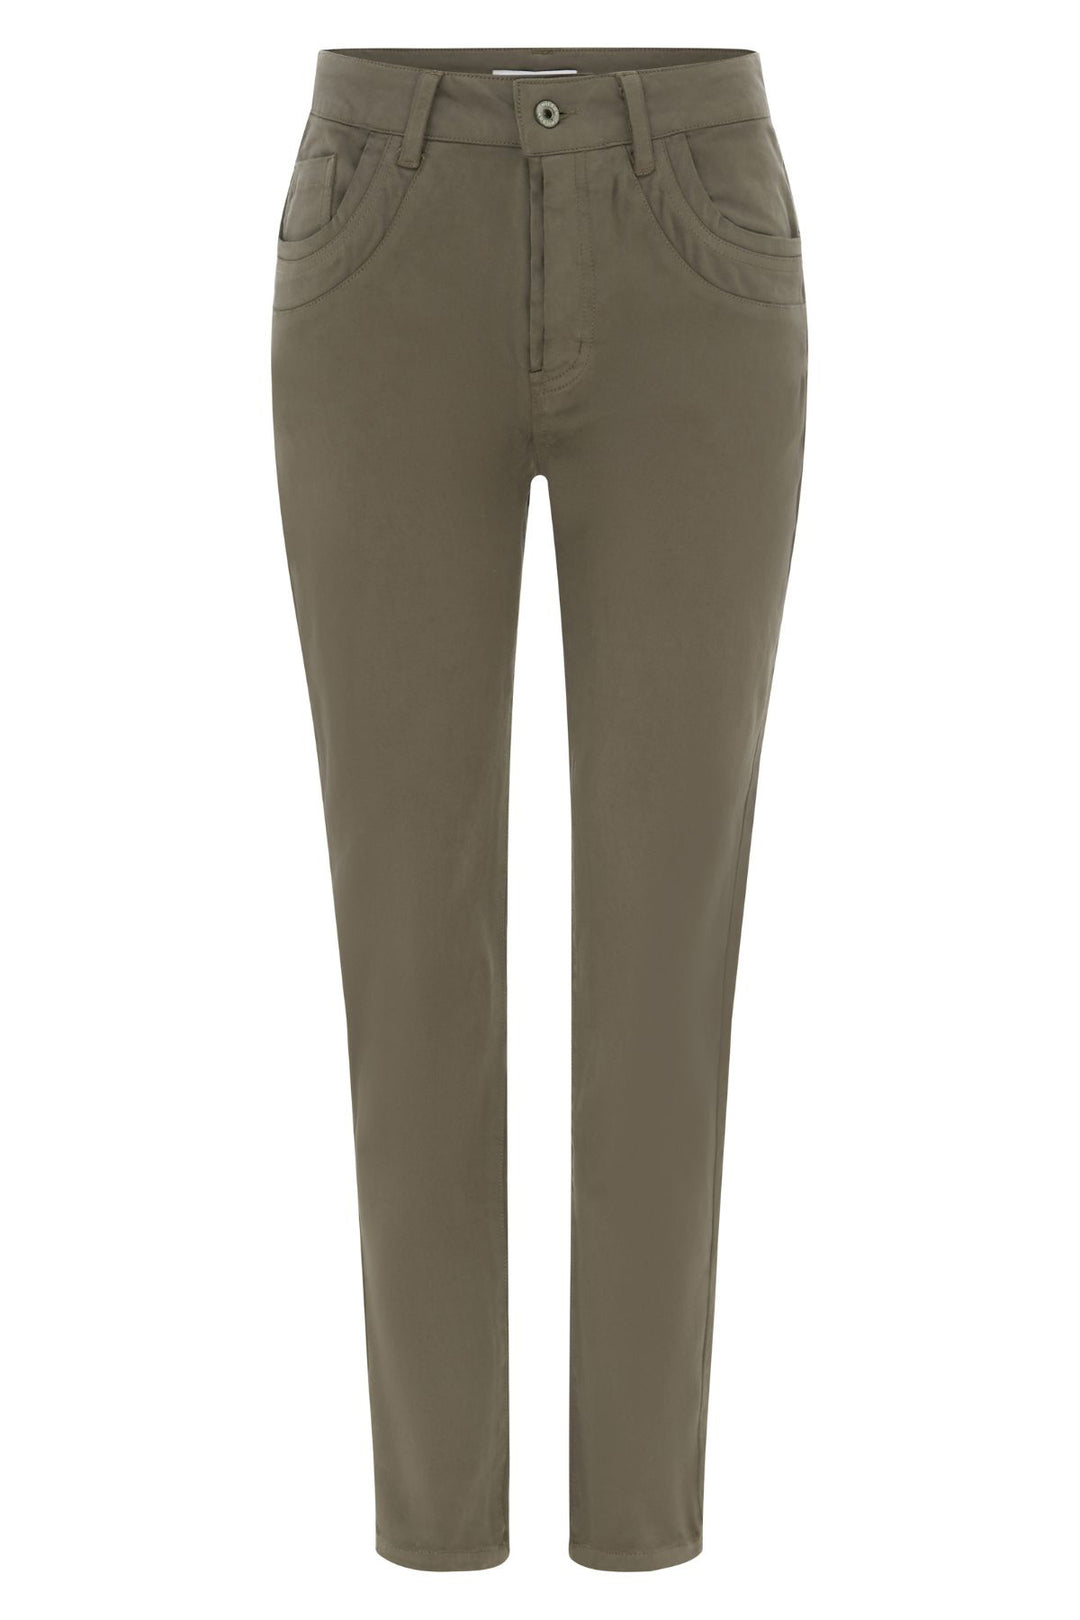 The classic Phoebe Jean by Milson, in mink. These full-length jeans feature a mid-rise and cotton construction for superior comfort with a button fly. Upgrade your everyday style with this timeless look.  Brand : Milson Style Code : ML6150 Colour : Mink Fabric : 98% Cotton 5% Spandex Wash separately, cold hand wash